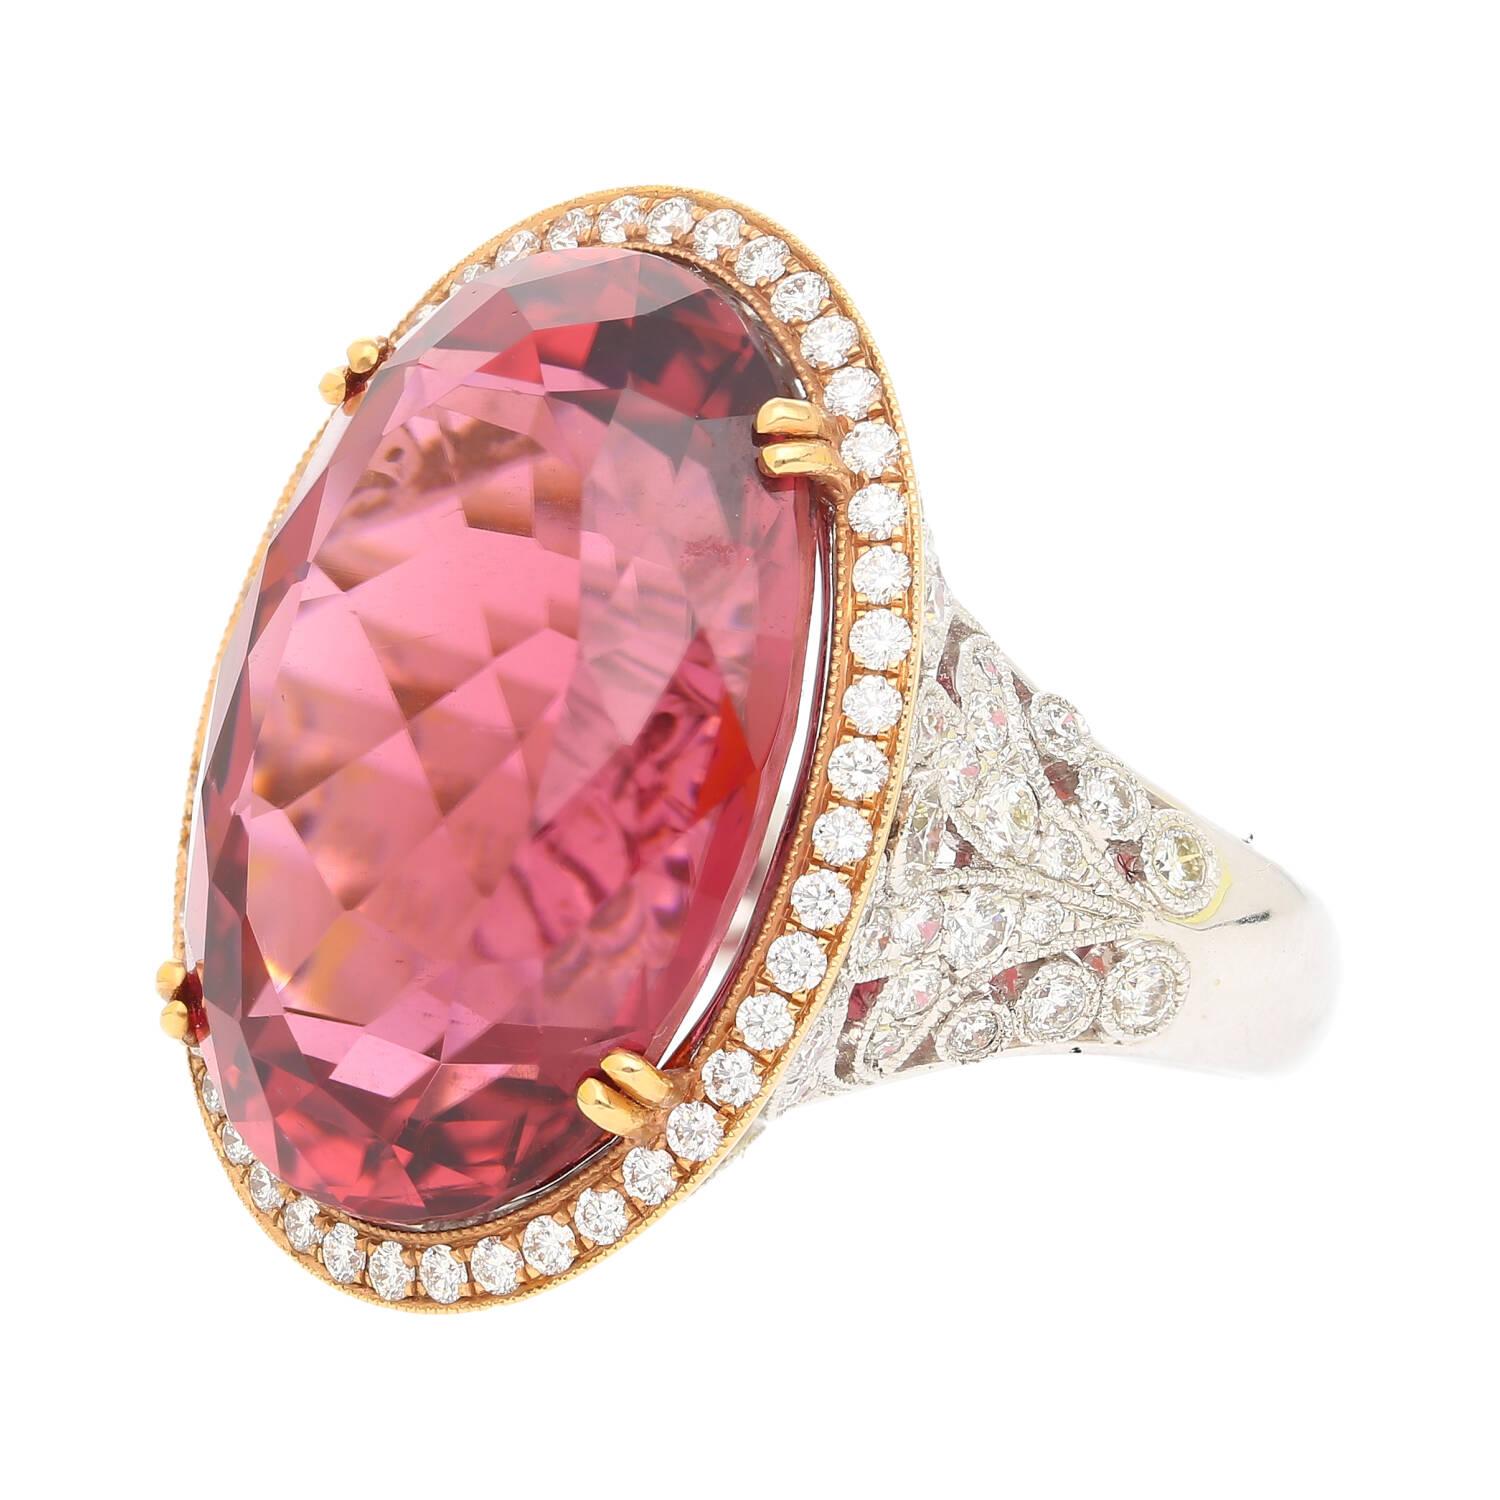 AGL Certified 28.29 Carat No Heat Pink Tourmaline And Round Cut Diamond Halo in Floral 18K White Gold Ring Shank.

The center stone is an impressive 28.29-carat pink tourmaline, oval cut with maximum brilliance and bearing no heat treatment,